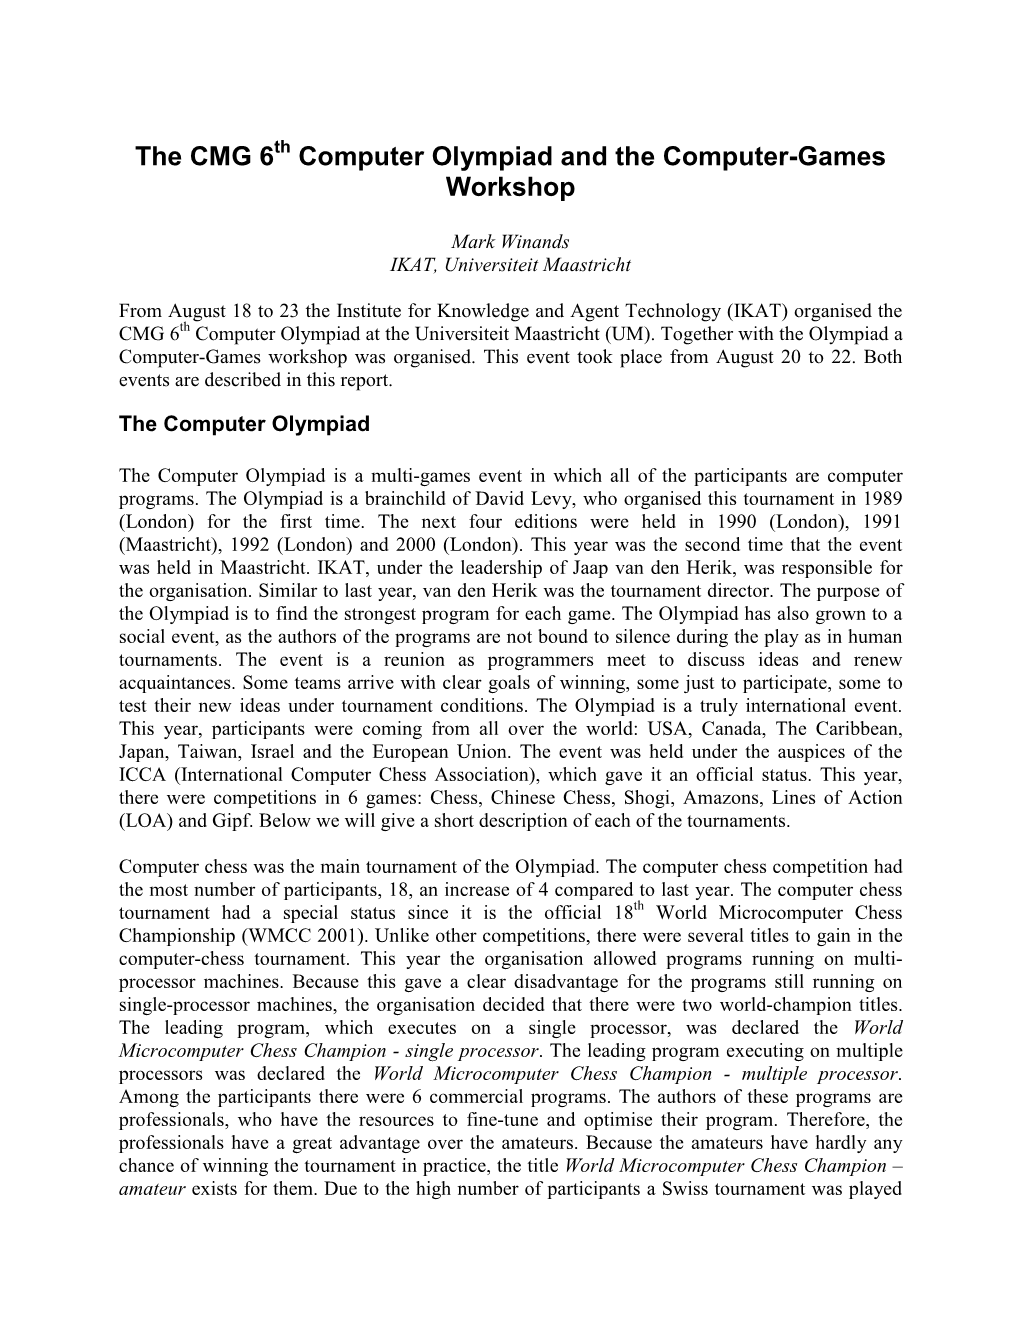 The CMG 6 Computer Olympiad and the Computer-Games Workshop